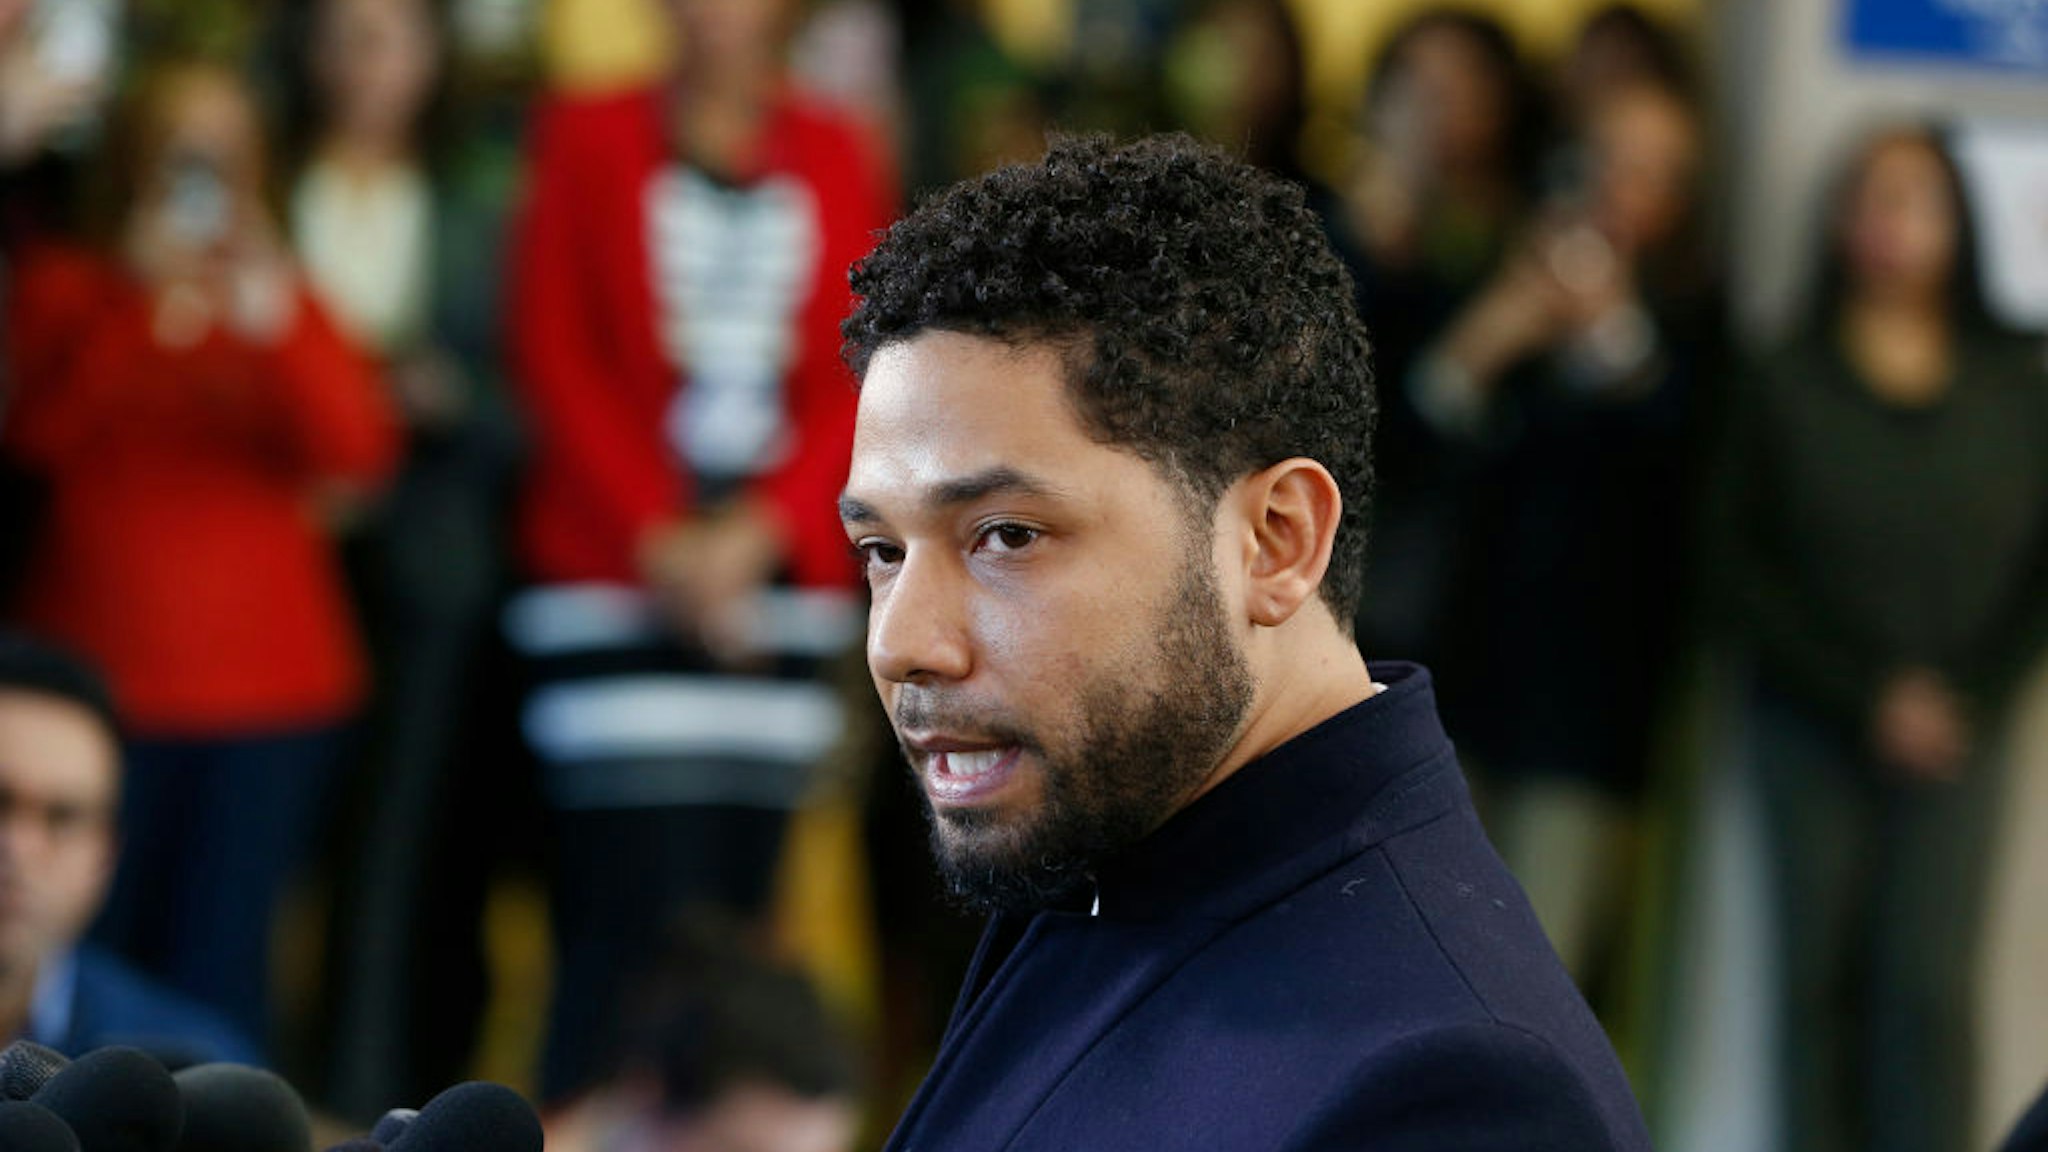 Actor Jussie Smollett speaks with members of the media after his court appearance at Leighton Courthouse on March 26, 2019 in Chicago, Illinois.